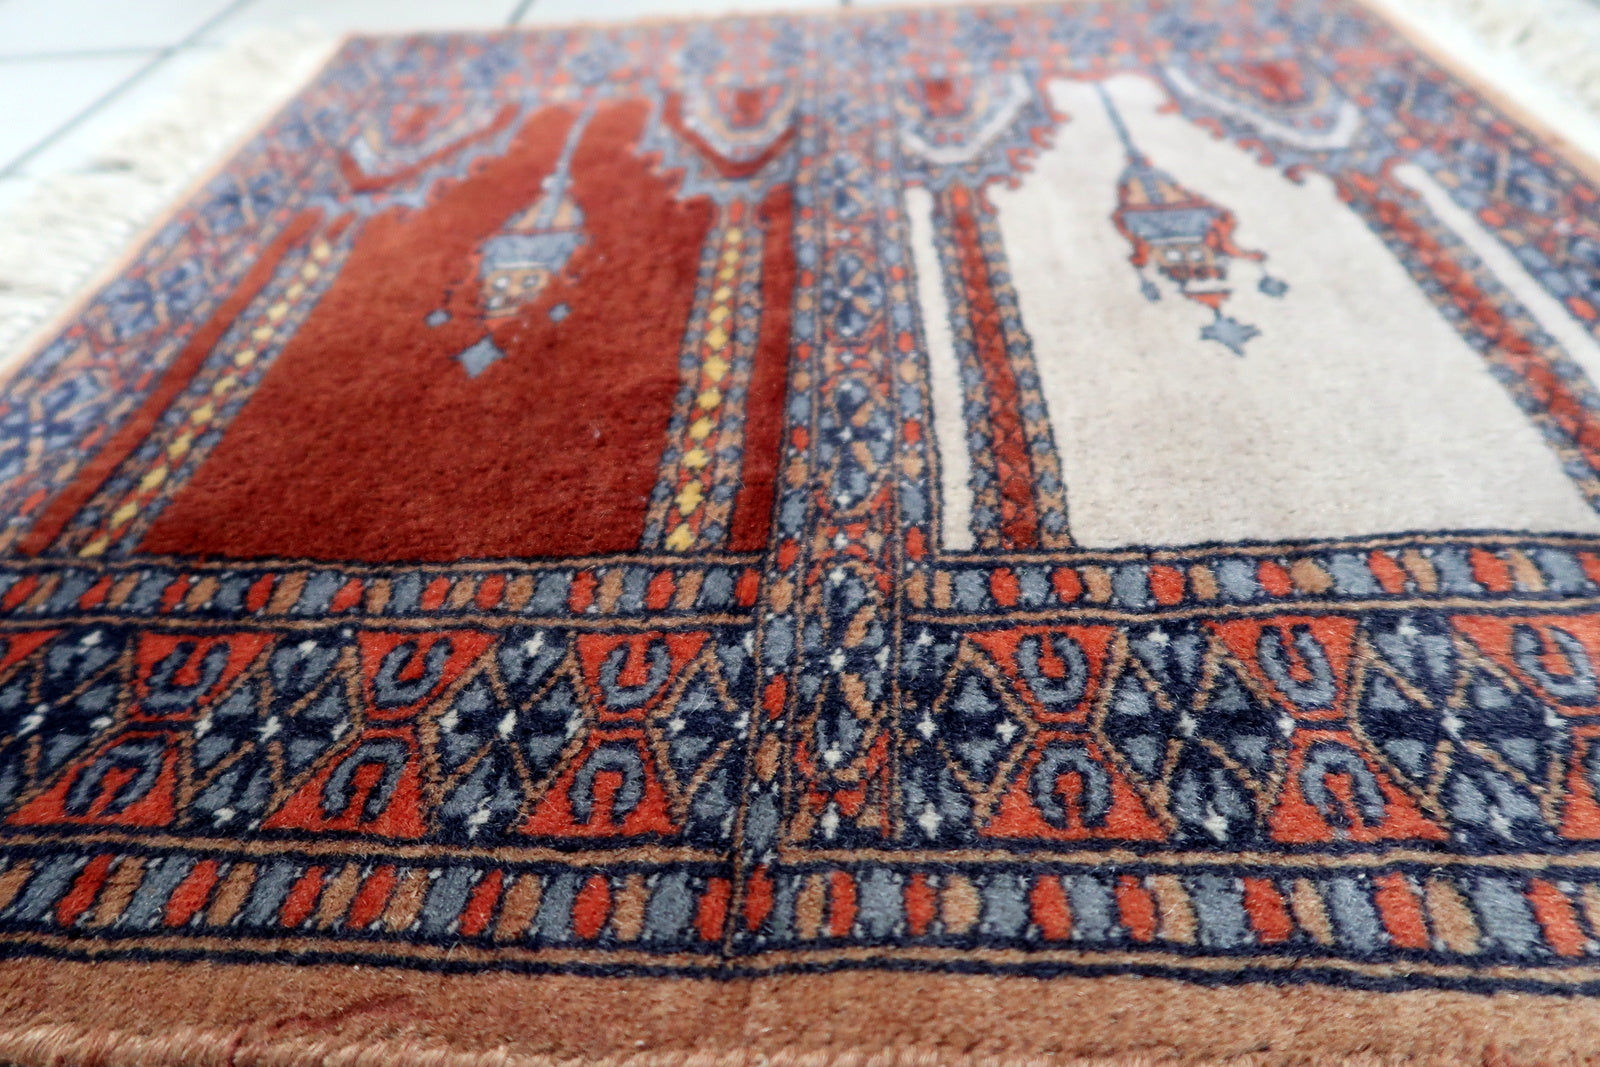 Artistic display of the rug in a prayer area, adding spirituality and tradition to the space